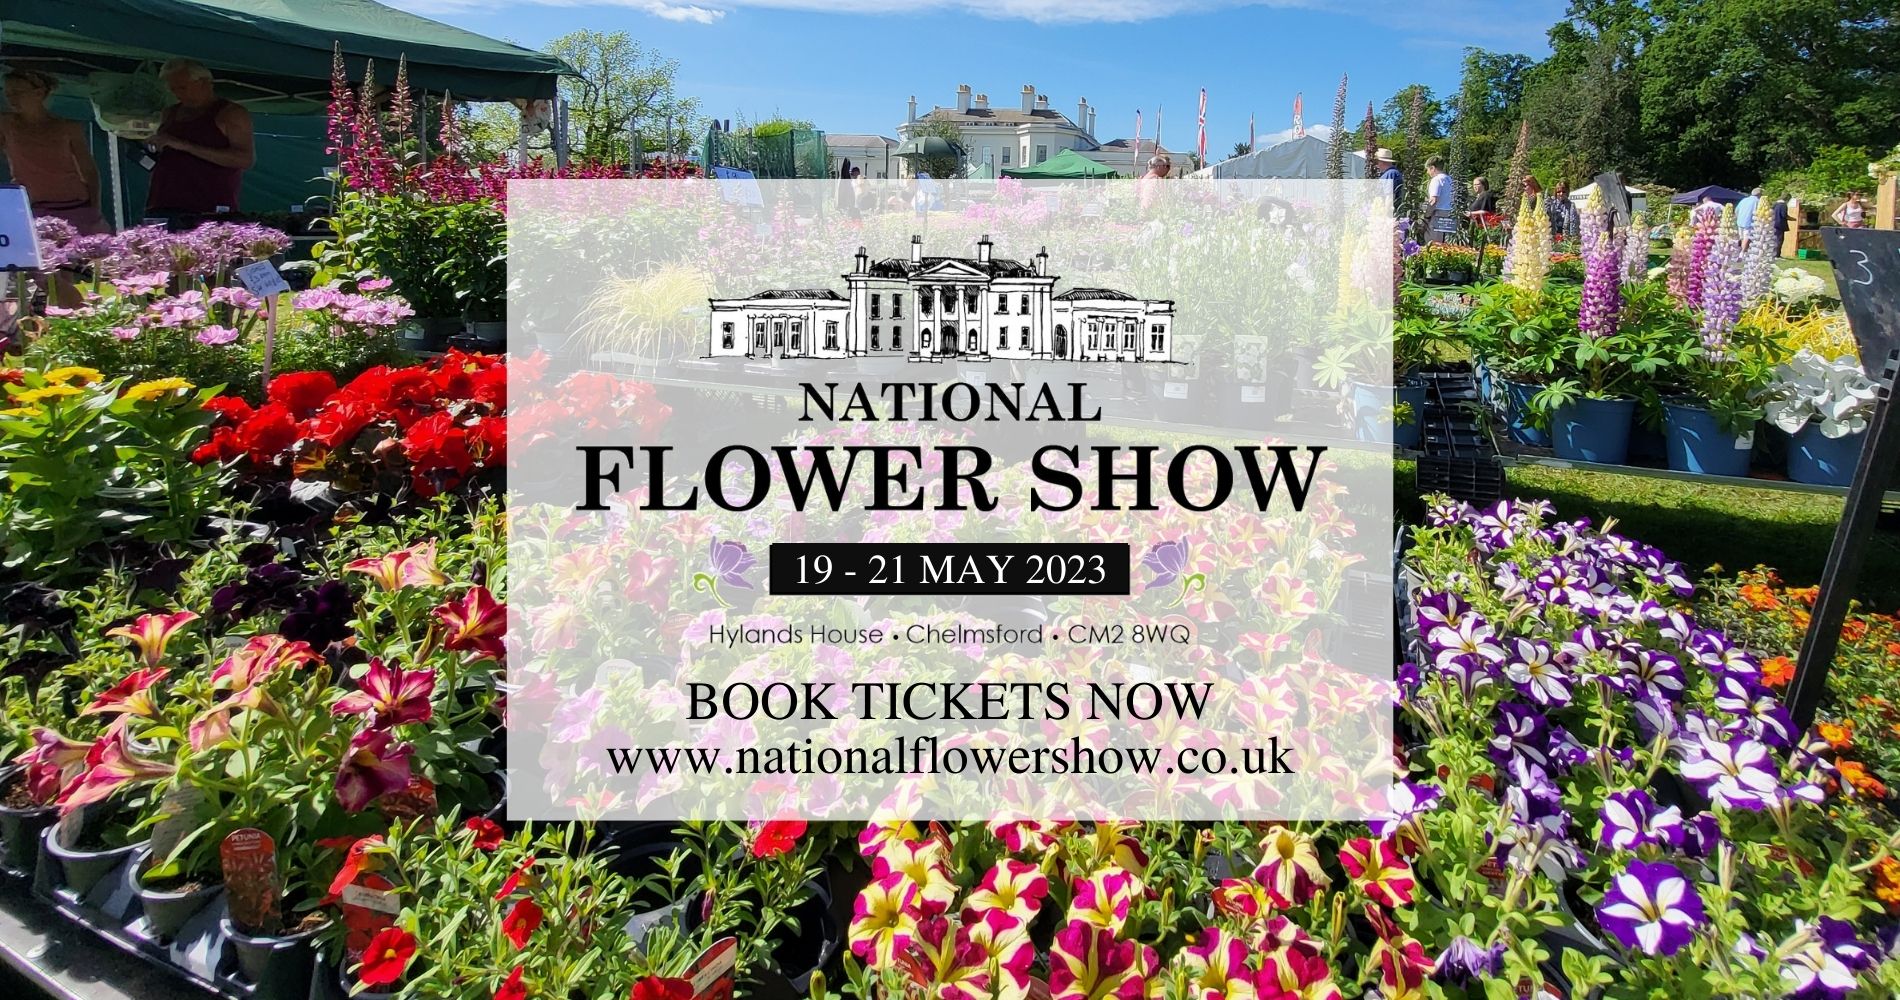 National Flower Show Hylands House 20 May 2022 (Choose tickets